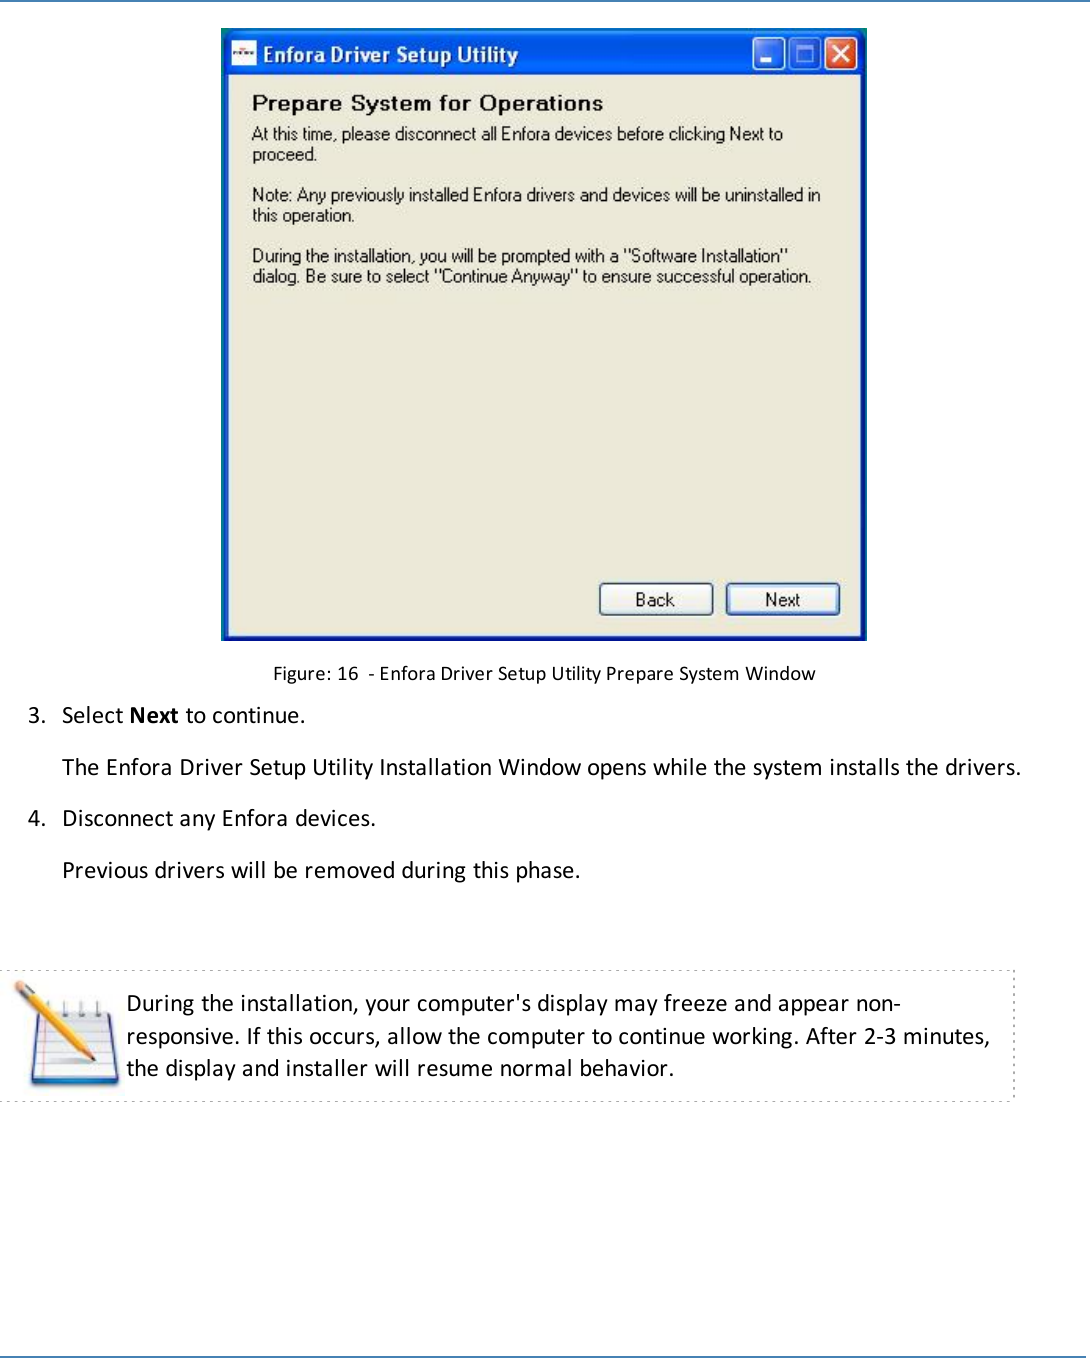 23Figure: 16 - Enfora Driver Setup Utility Prepare System Window3. Select Next to continue.The Enfora Driver Setup Utility Installation Window opens while the system installs the drivers.4. Disconnect any Enfora devices.Previous drivers will be removed during this phase.During the installation, your computer&apos;s display may freeze and appear non-responsive. If this occurs, allow the computer to continue working. After 2-3 minutes,the display and installer will resume normal behavior.